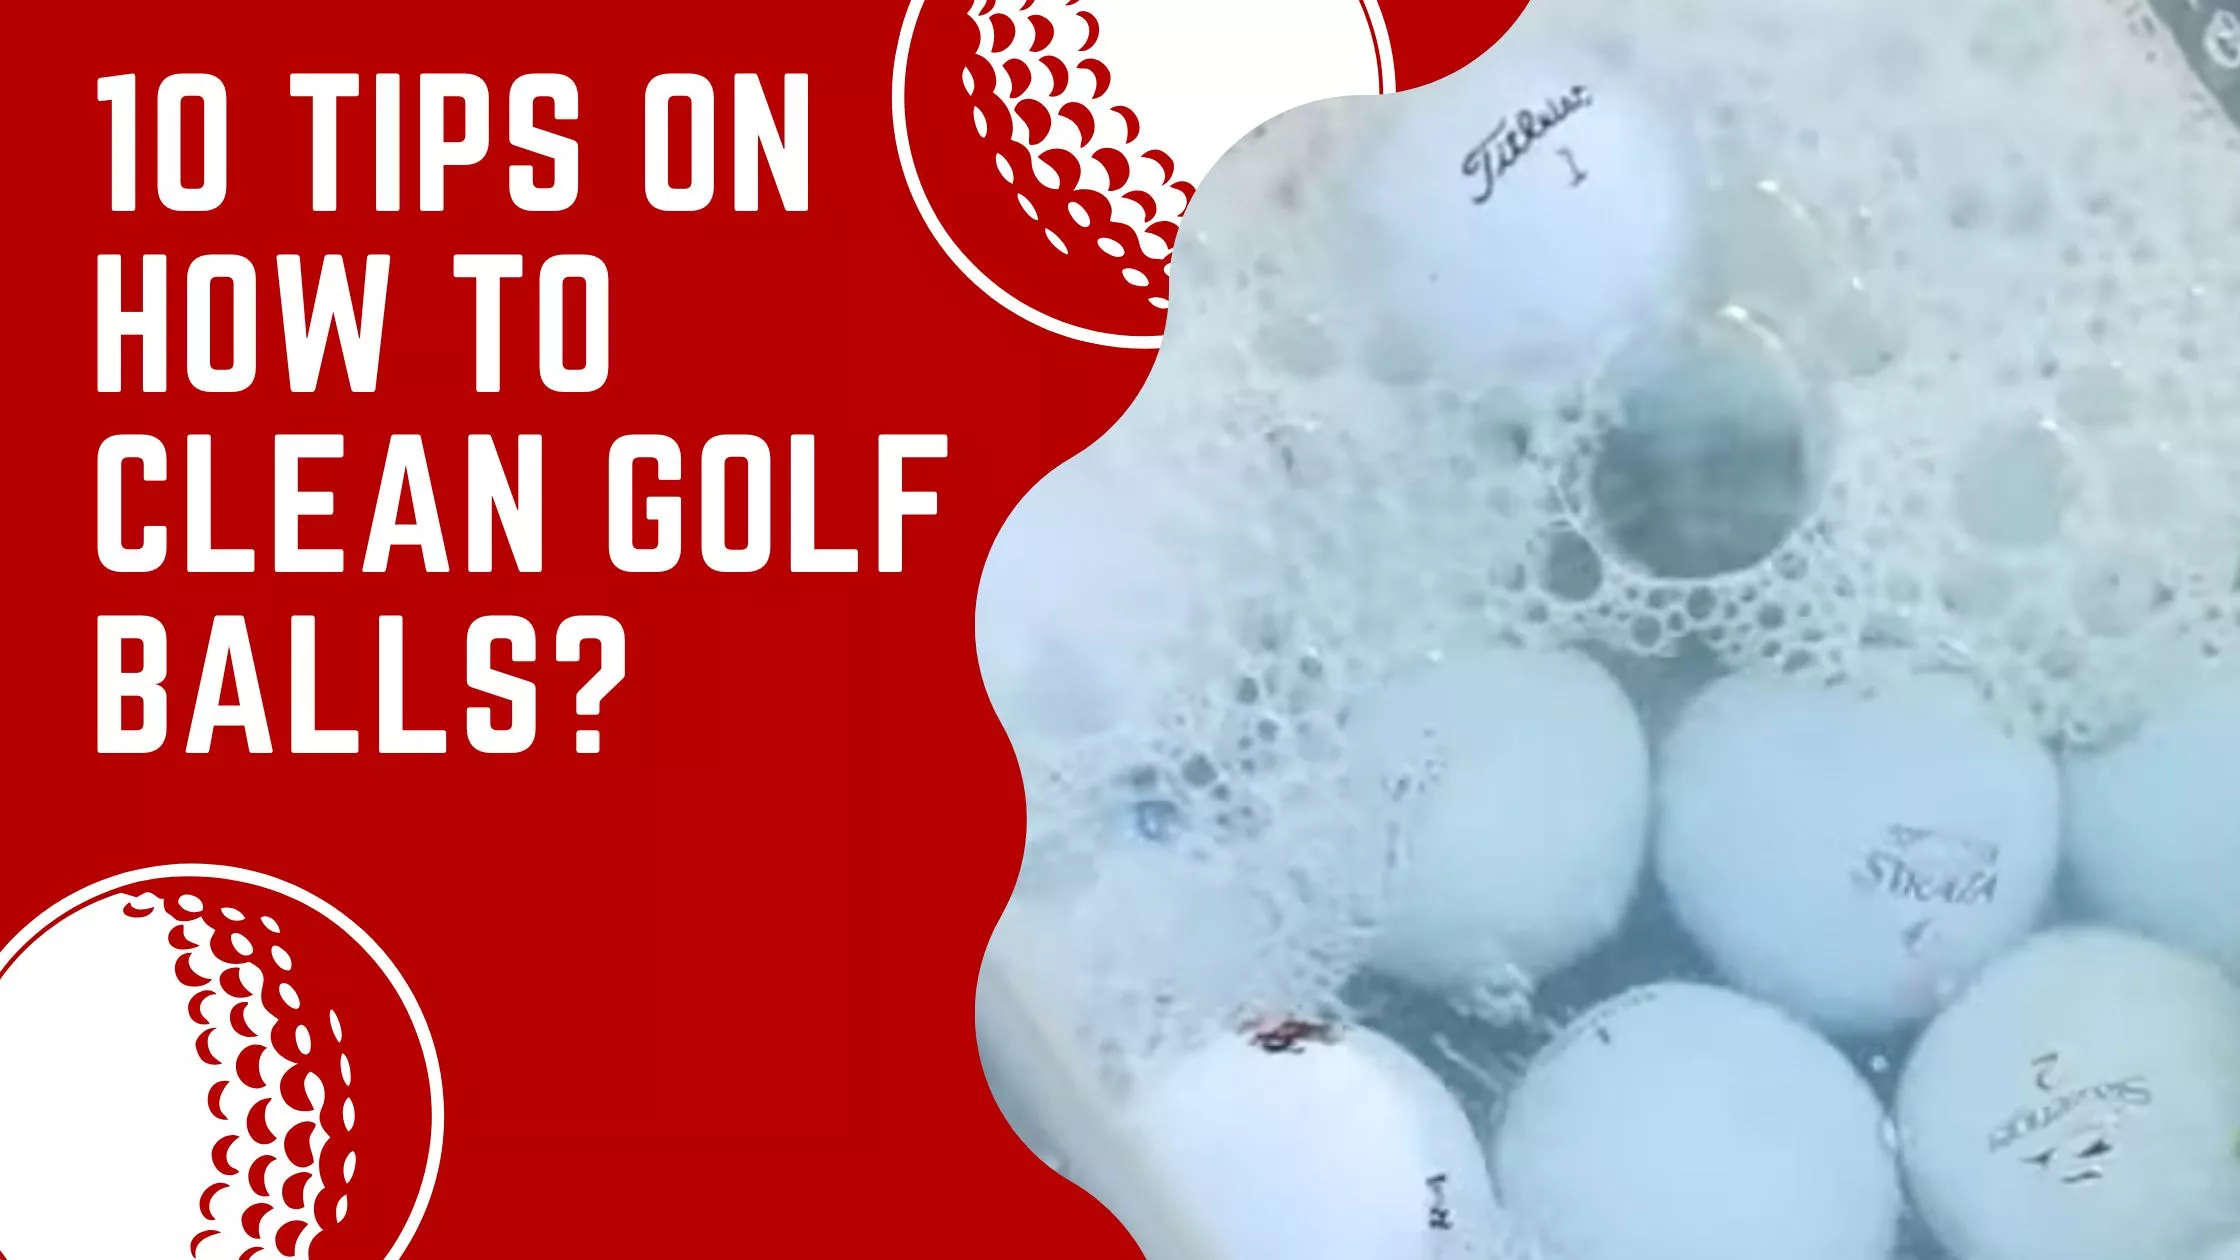 10 Tips On How To Clean Golf Balls?